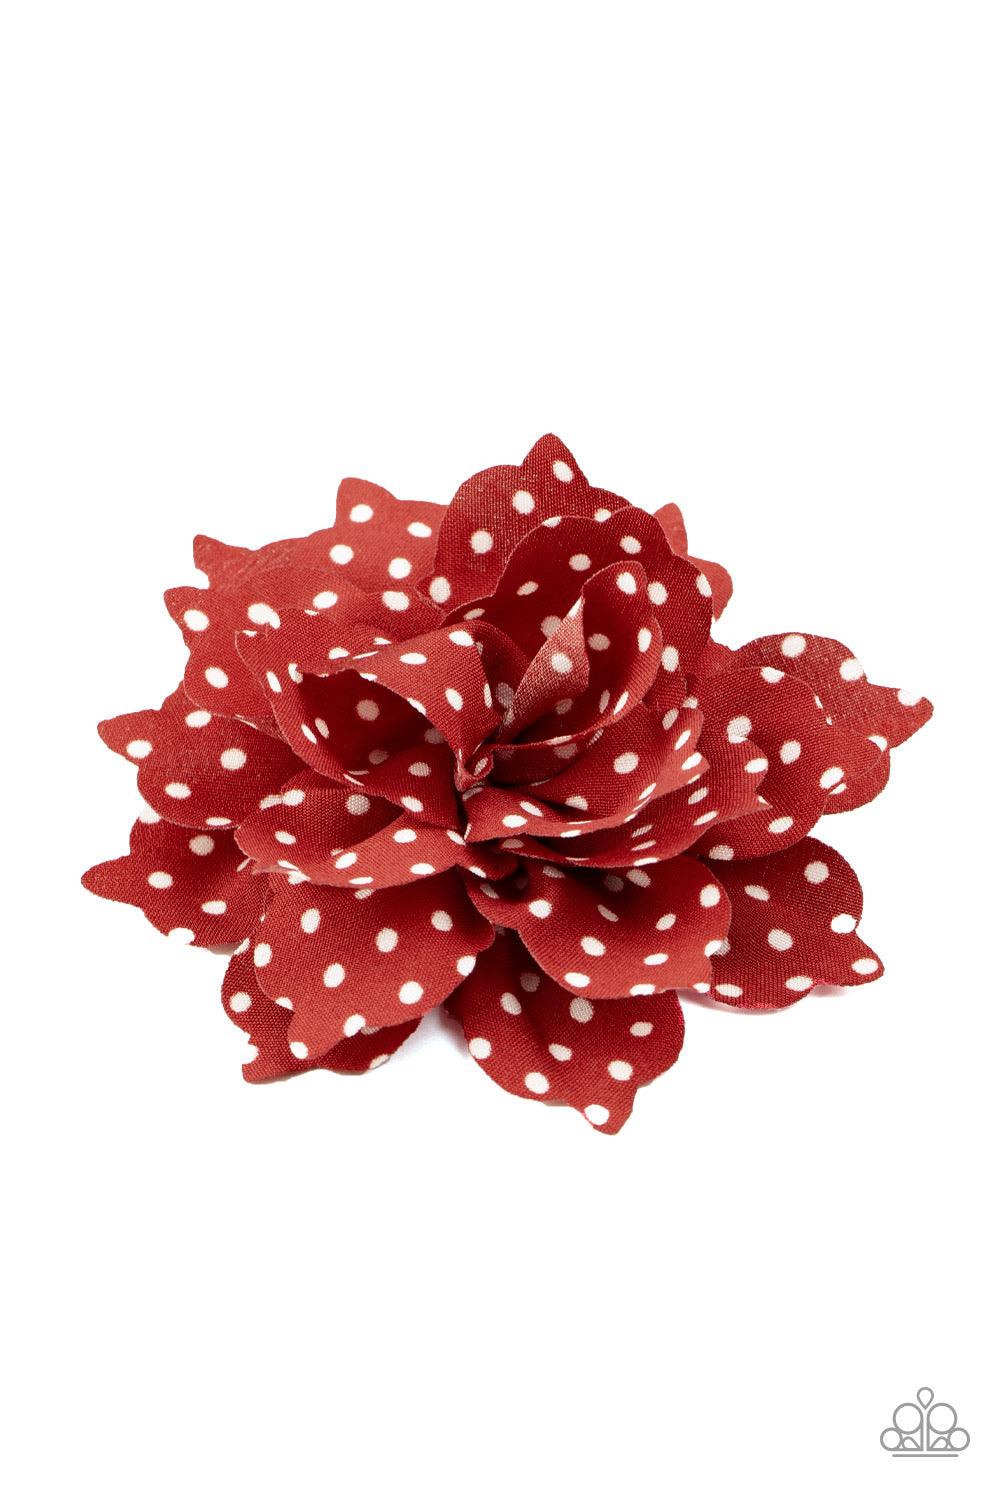 Paparazzi Accessories Springtime Social - Red Dotted in white polka dots, soft navy red petals gather into a playful blossom for a seasonal look. Features a standard hair clip. Sold as one individual hair clip. Hair Accessories